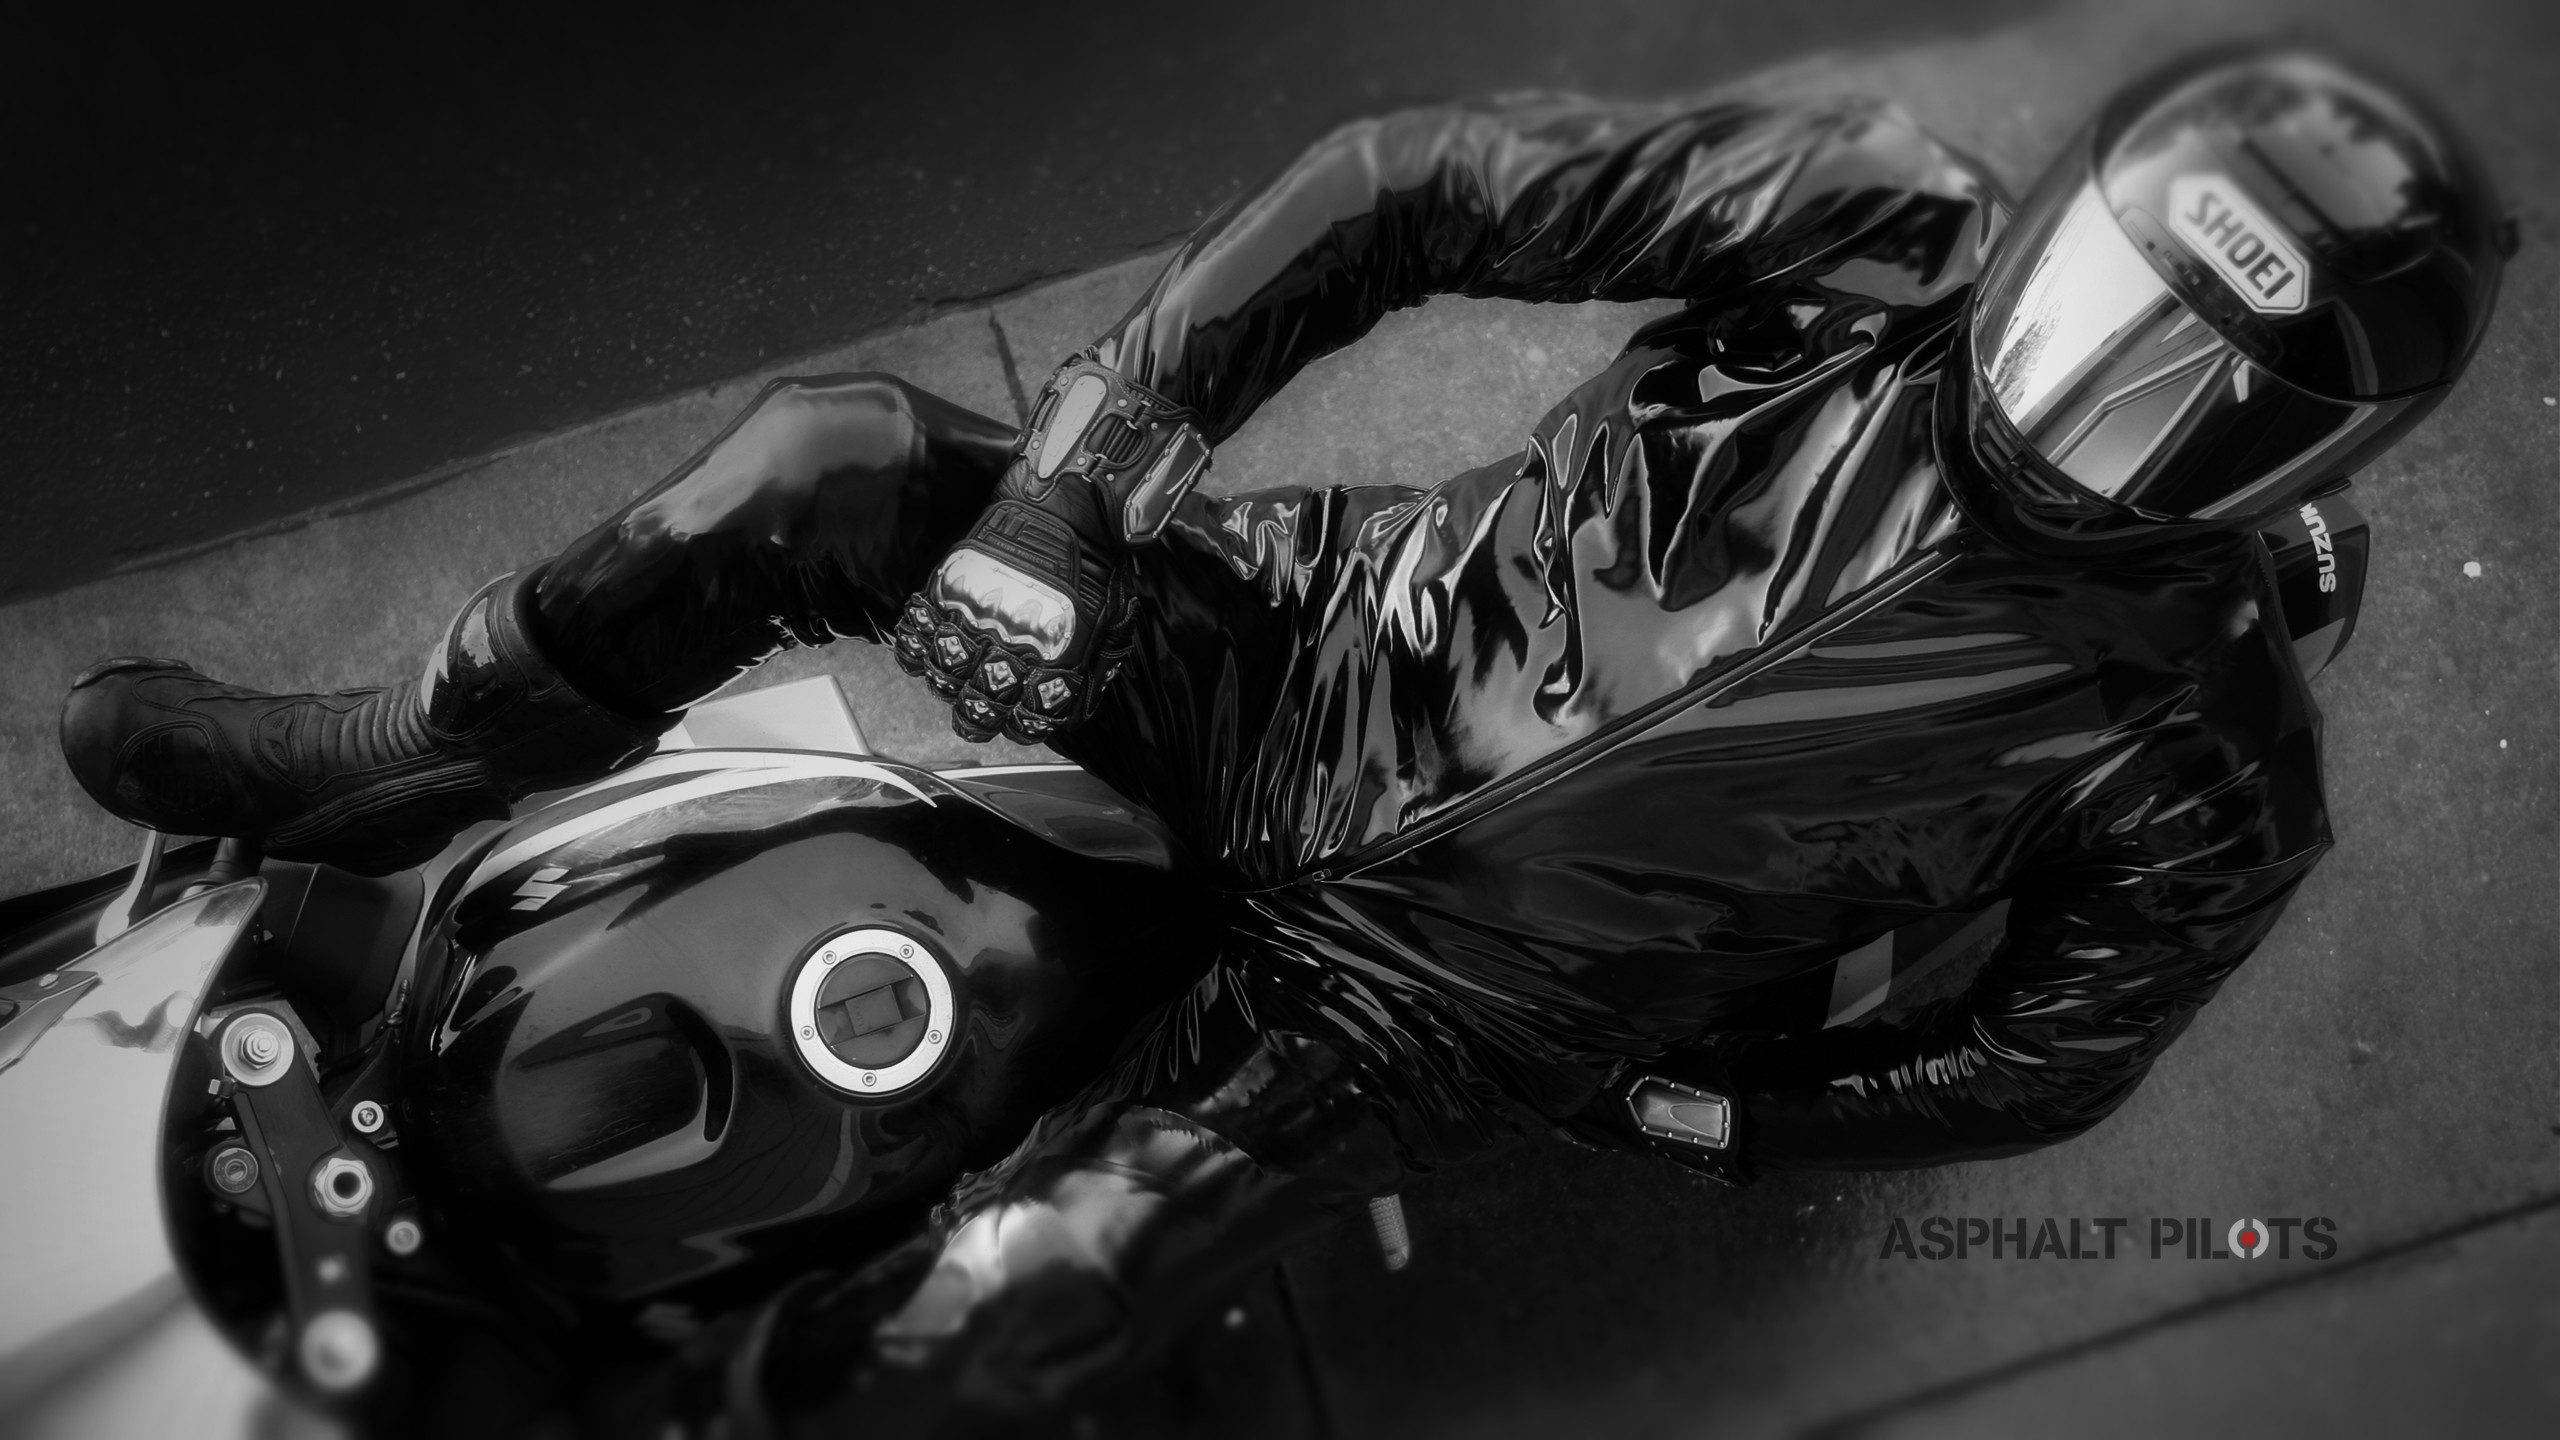 2560x1440 Wallpaper : Asphalt Pilots | Leather Motorcycle Race Suits, Jackets,  Thermals, Apparel, and accessories